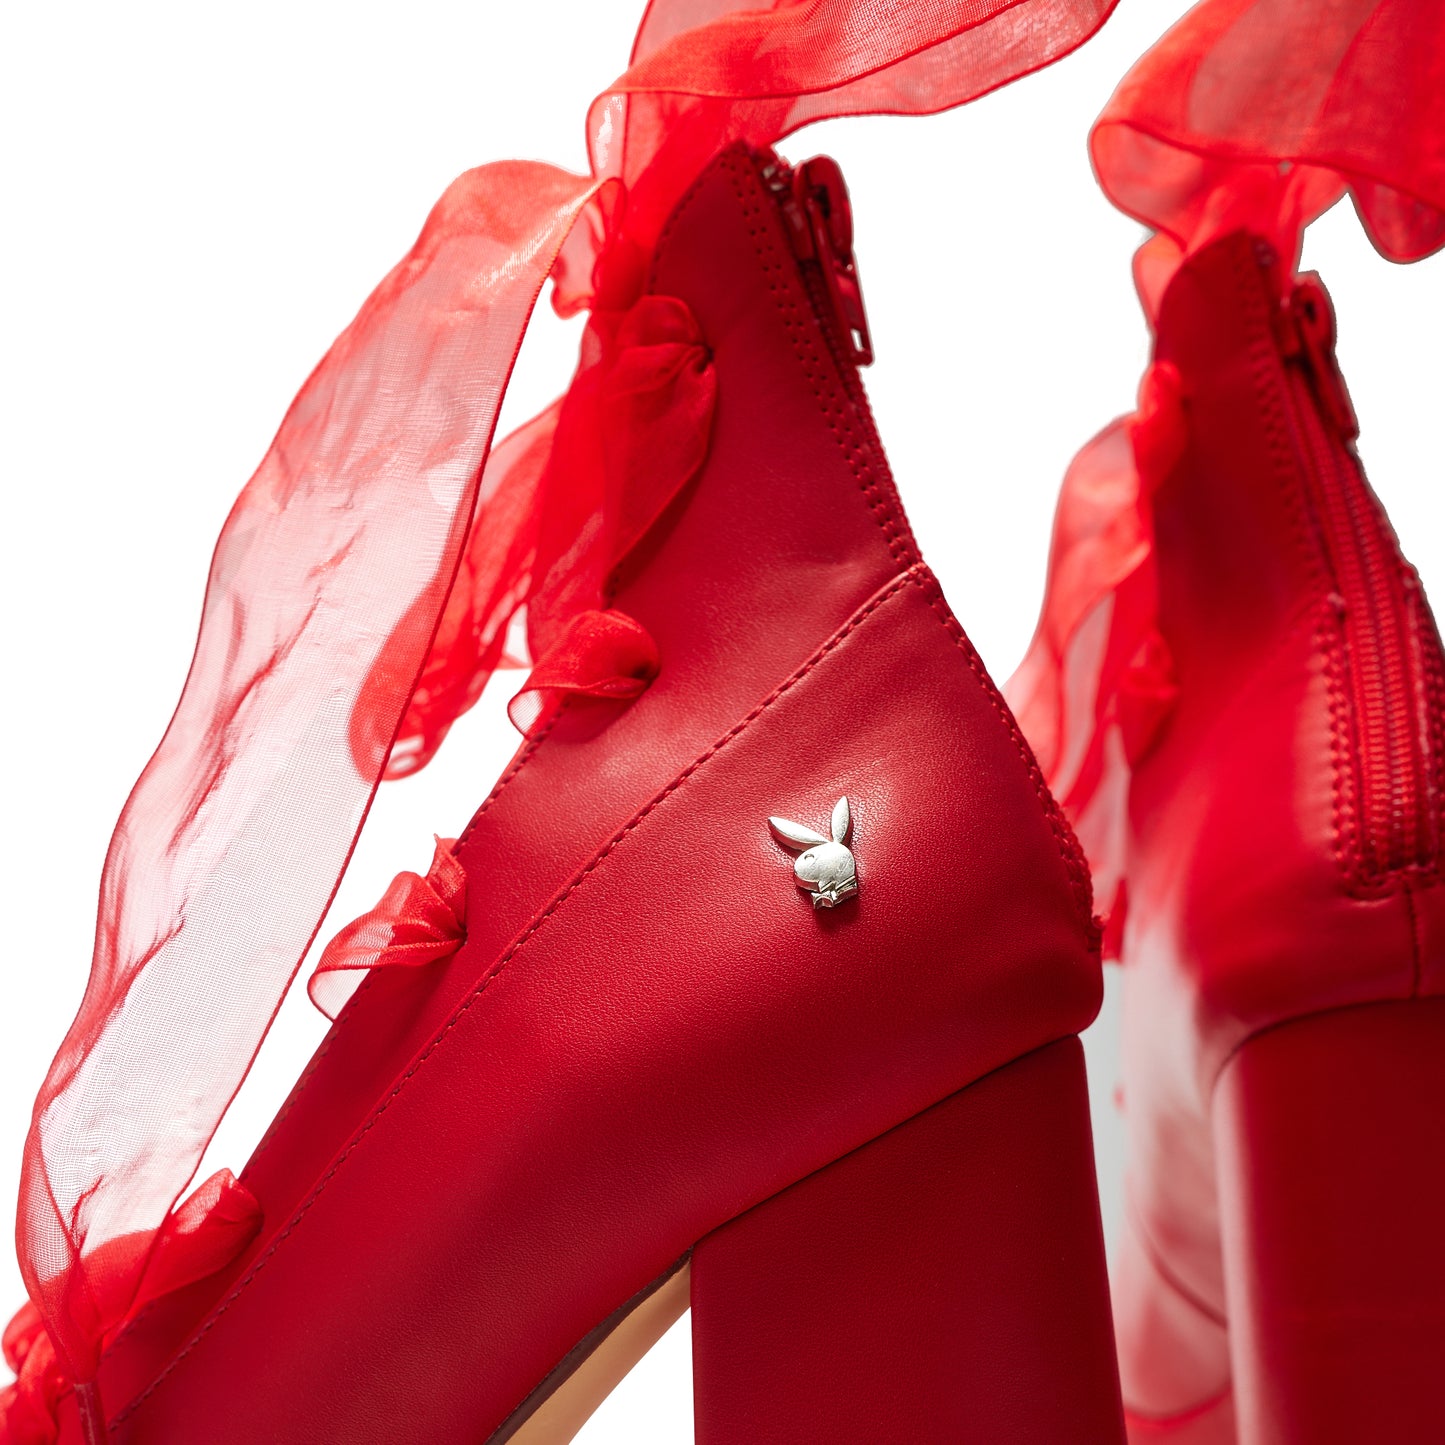 Playboy Reprise Red Switch Boots  Playboy x KOI Collection – KOI footwear